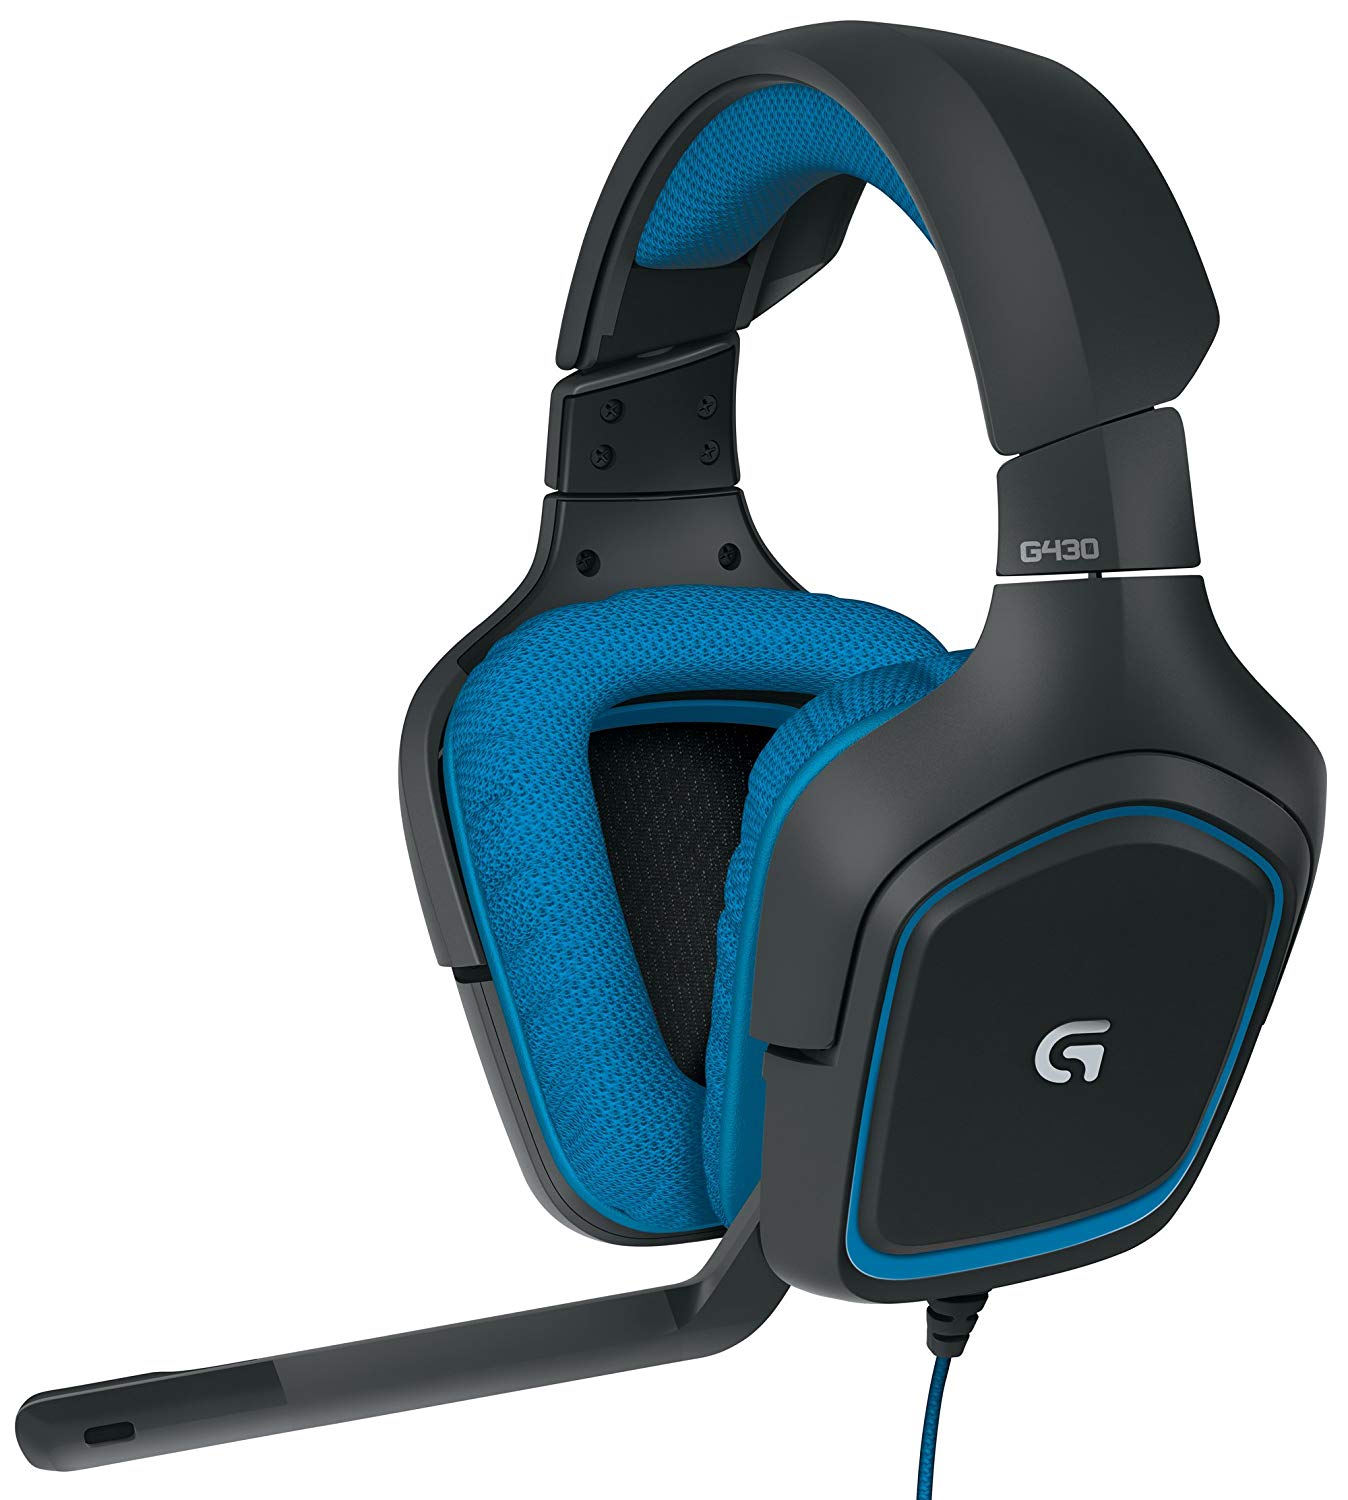 Logitech G430 7.1 DTS Headphone: X and Dolby Surround Sound Gaming Headset for PC, Playstation 4 – On-Cable Controls – Sports-Performance Ear Pads – Rotating Ear Cups – Light Weight Design, Blue/Black